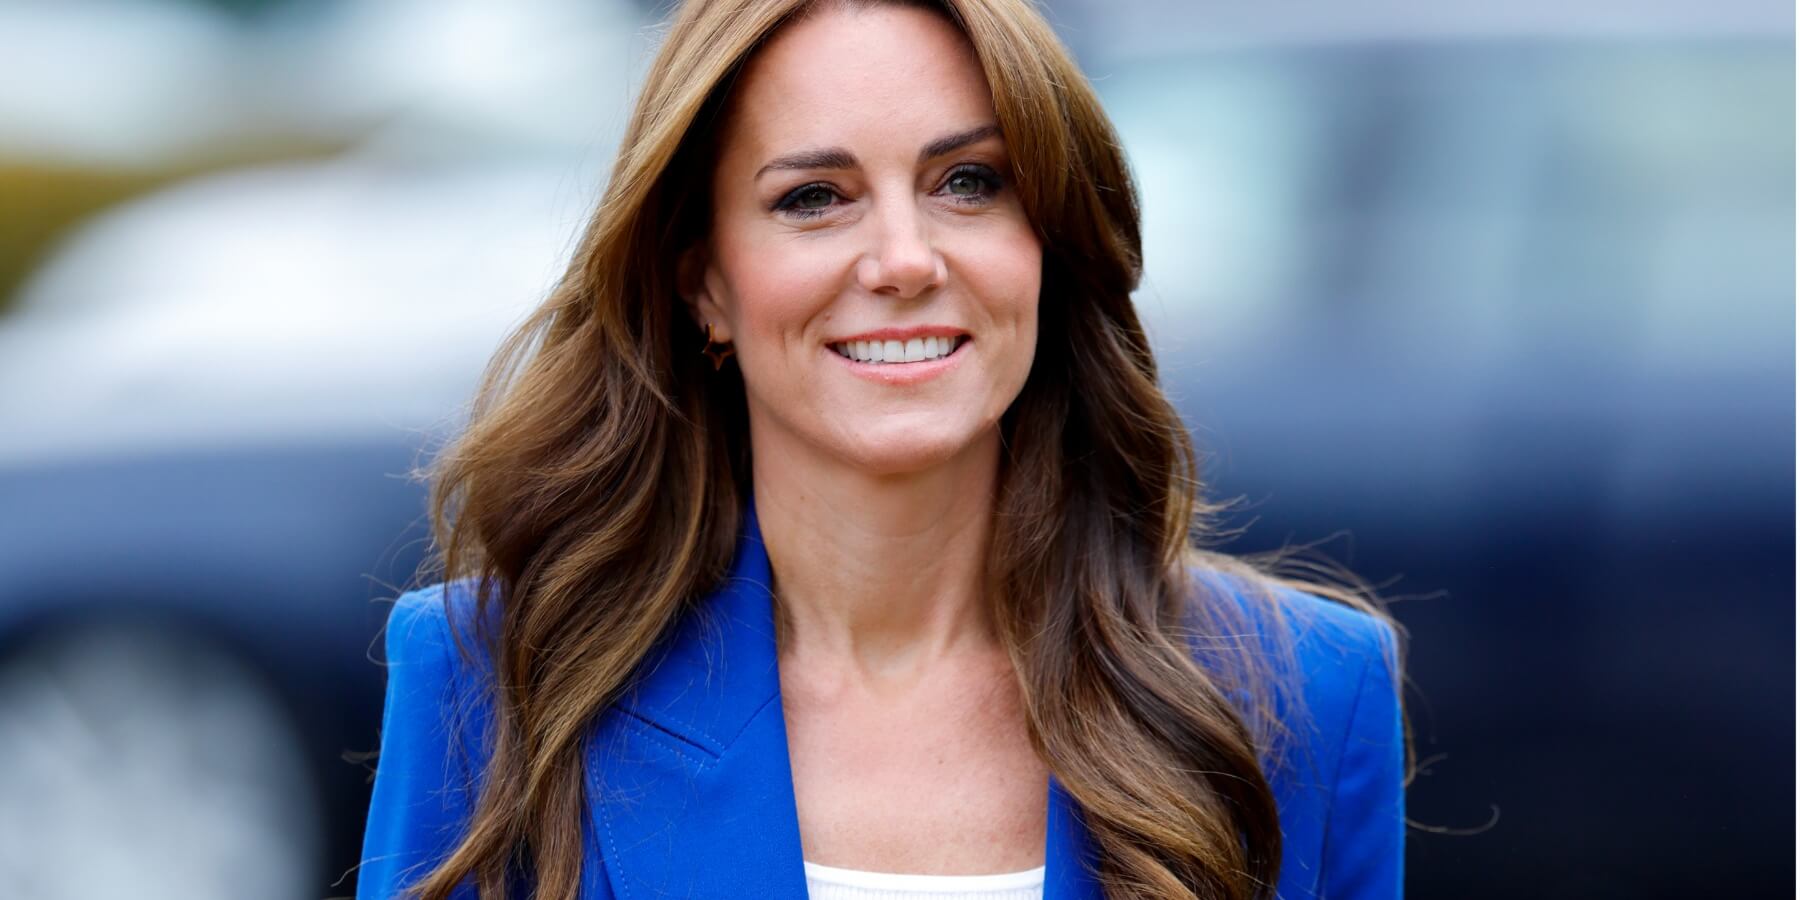 Kate Middleton is recovering at home from abdominal surgery